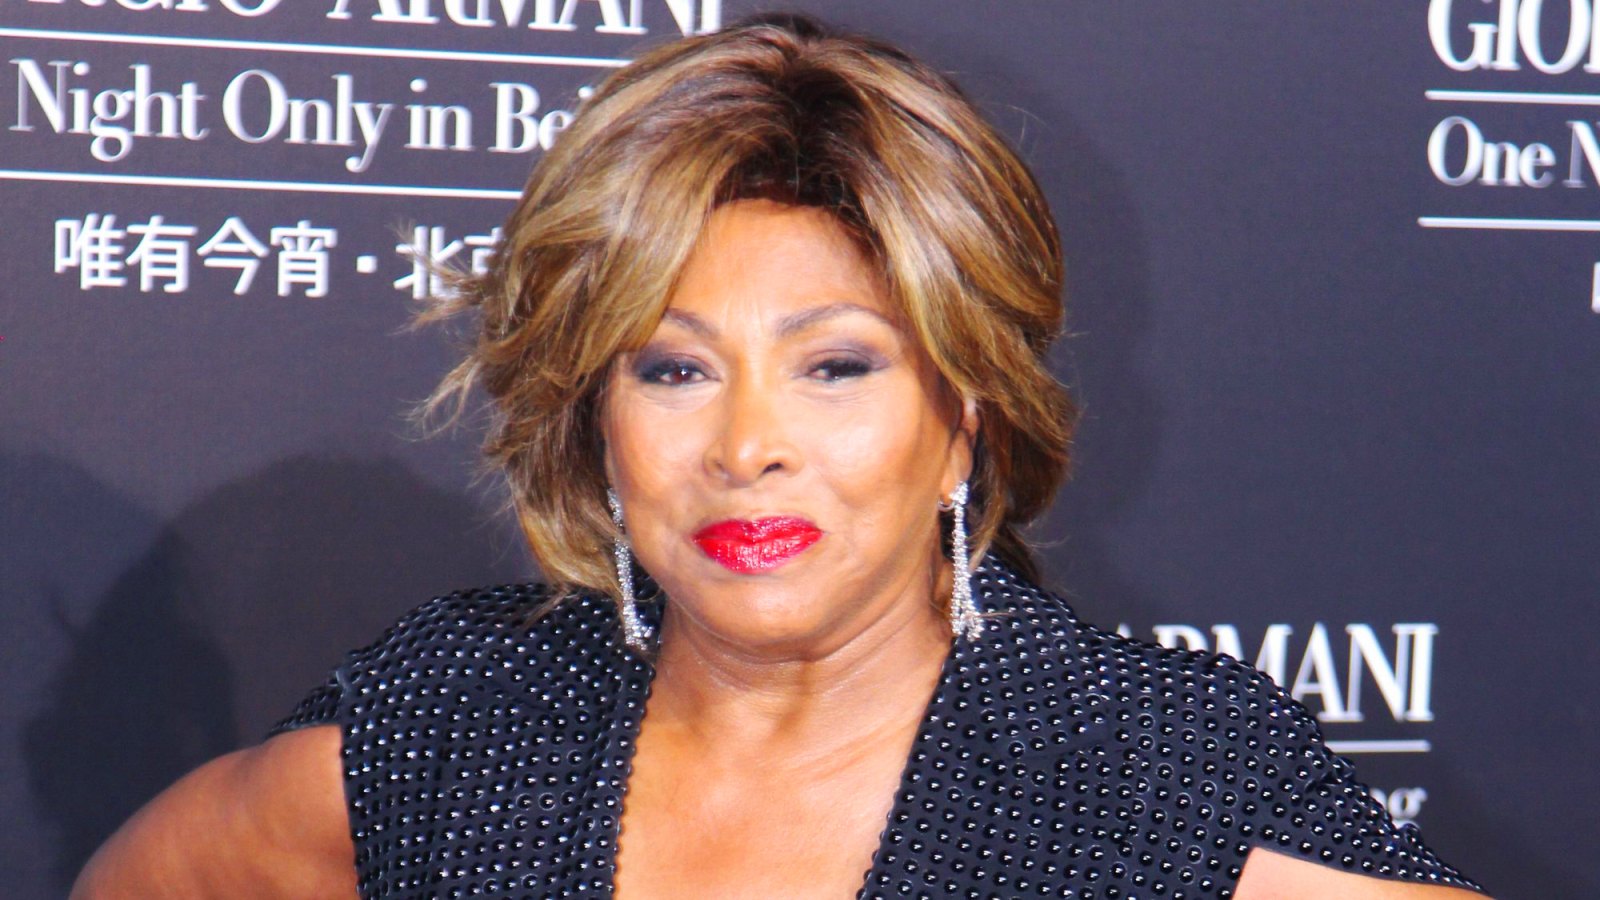 Tina Turner spreads sons ashes